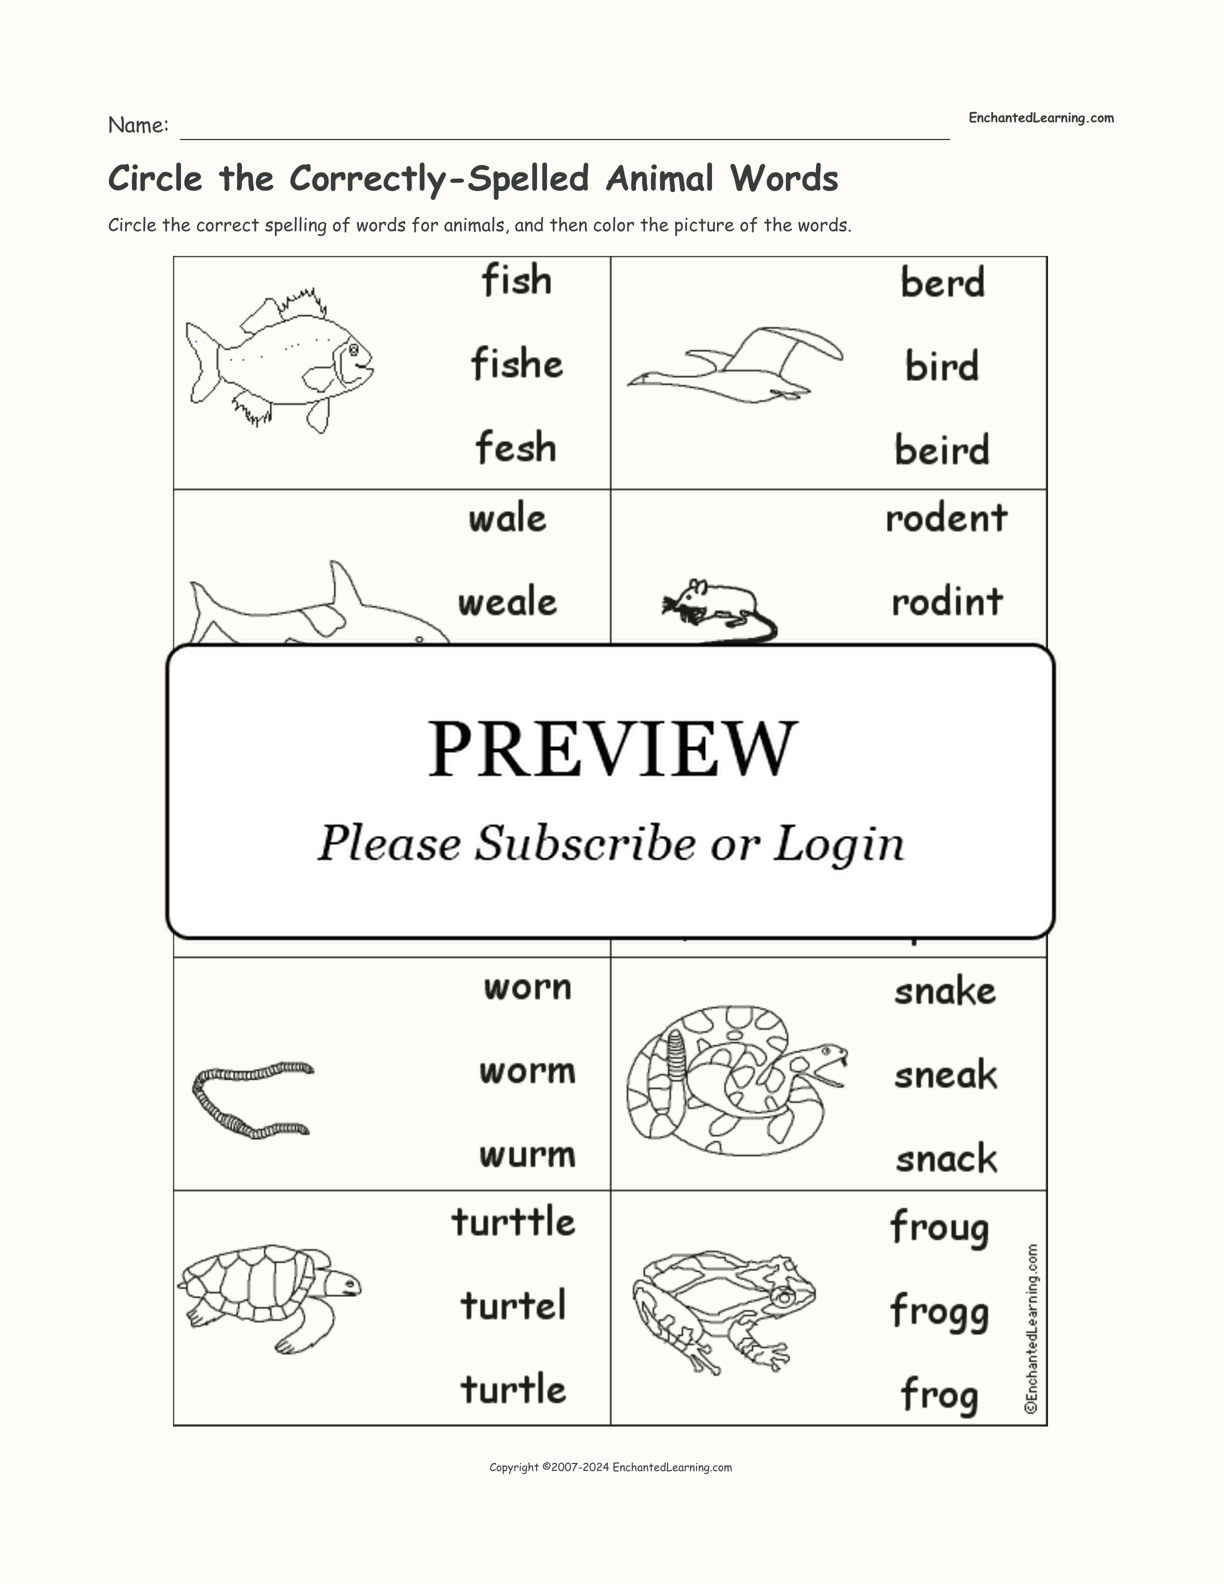 Circle the Correctly-Spelled Animal Words interactive worksheet page 1